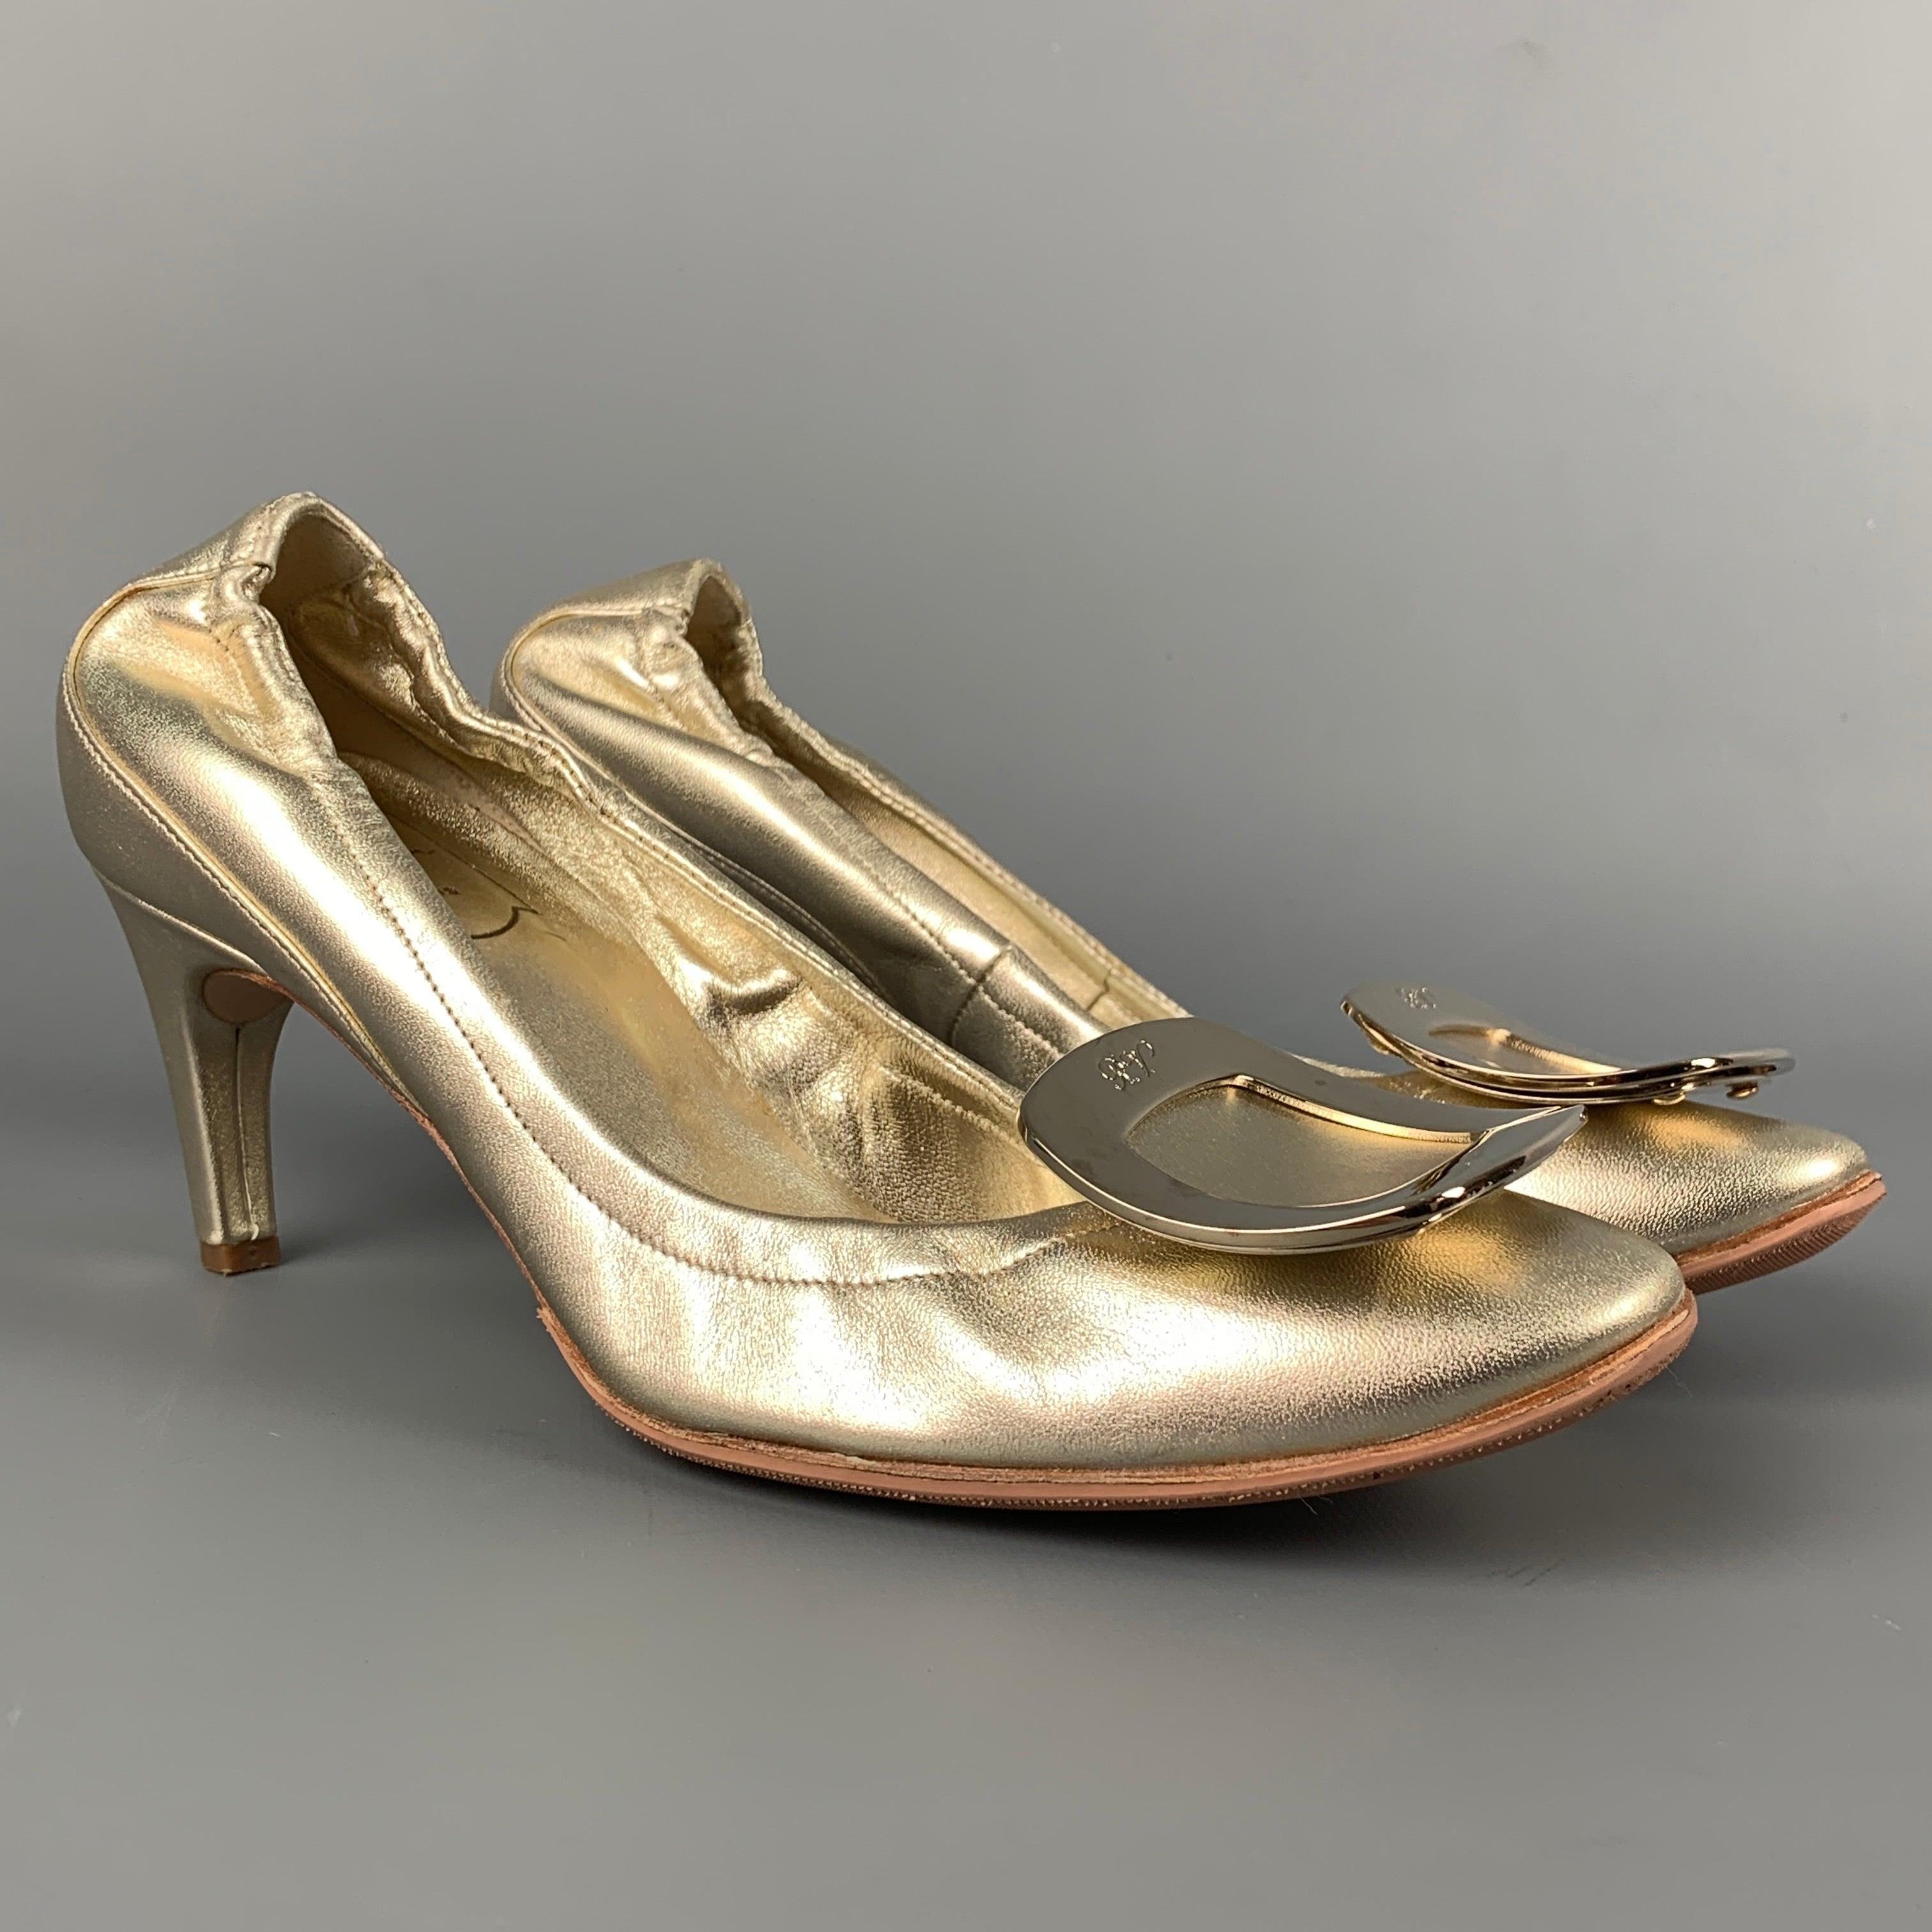 ROGER VIVIER pumps comes in a gold tone leather featuring a signature buckle detail and a curved heel. Made in Italy.Good
Pre-Owned Condition. 

Marked:   36 

Measurements: 
  Heel: 2.5 inches 
  
  
 
Reference: 111819
Category: Pumps
More